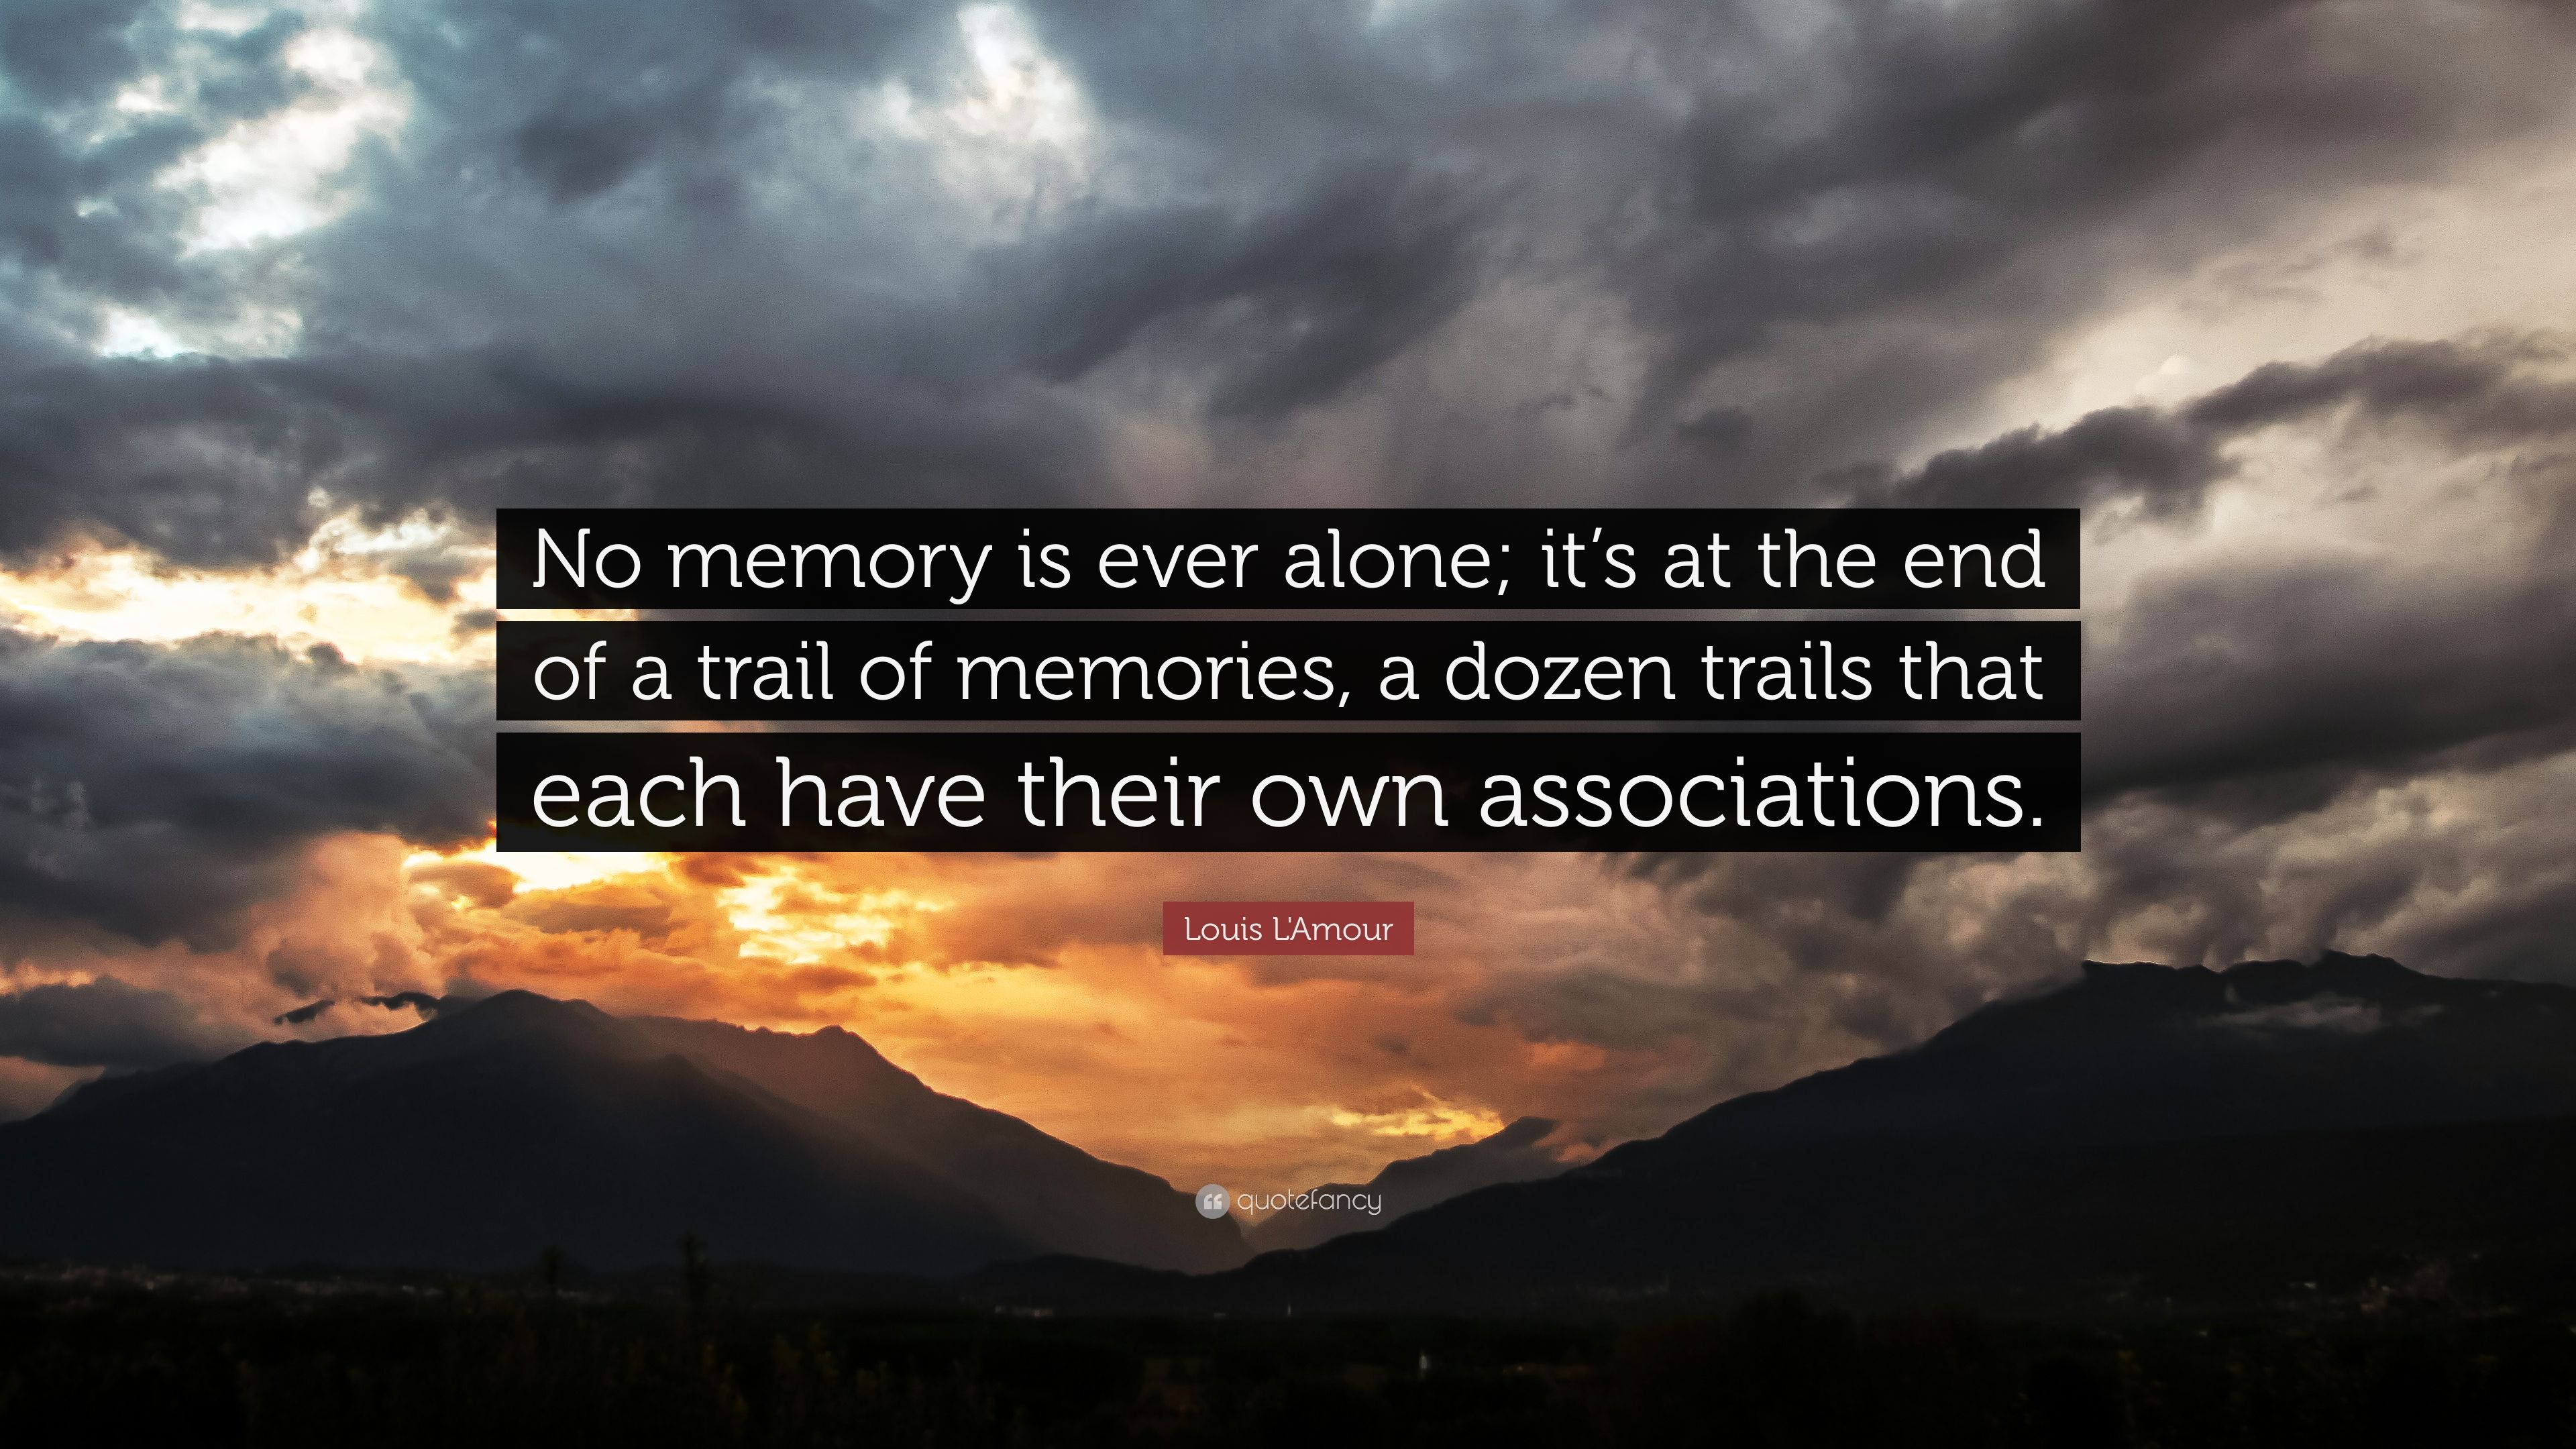 Louis L'Amour Quote: “No memory is ever alone; it's at the end of a trail